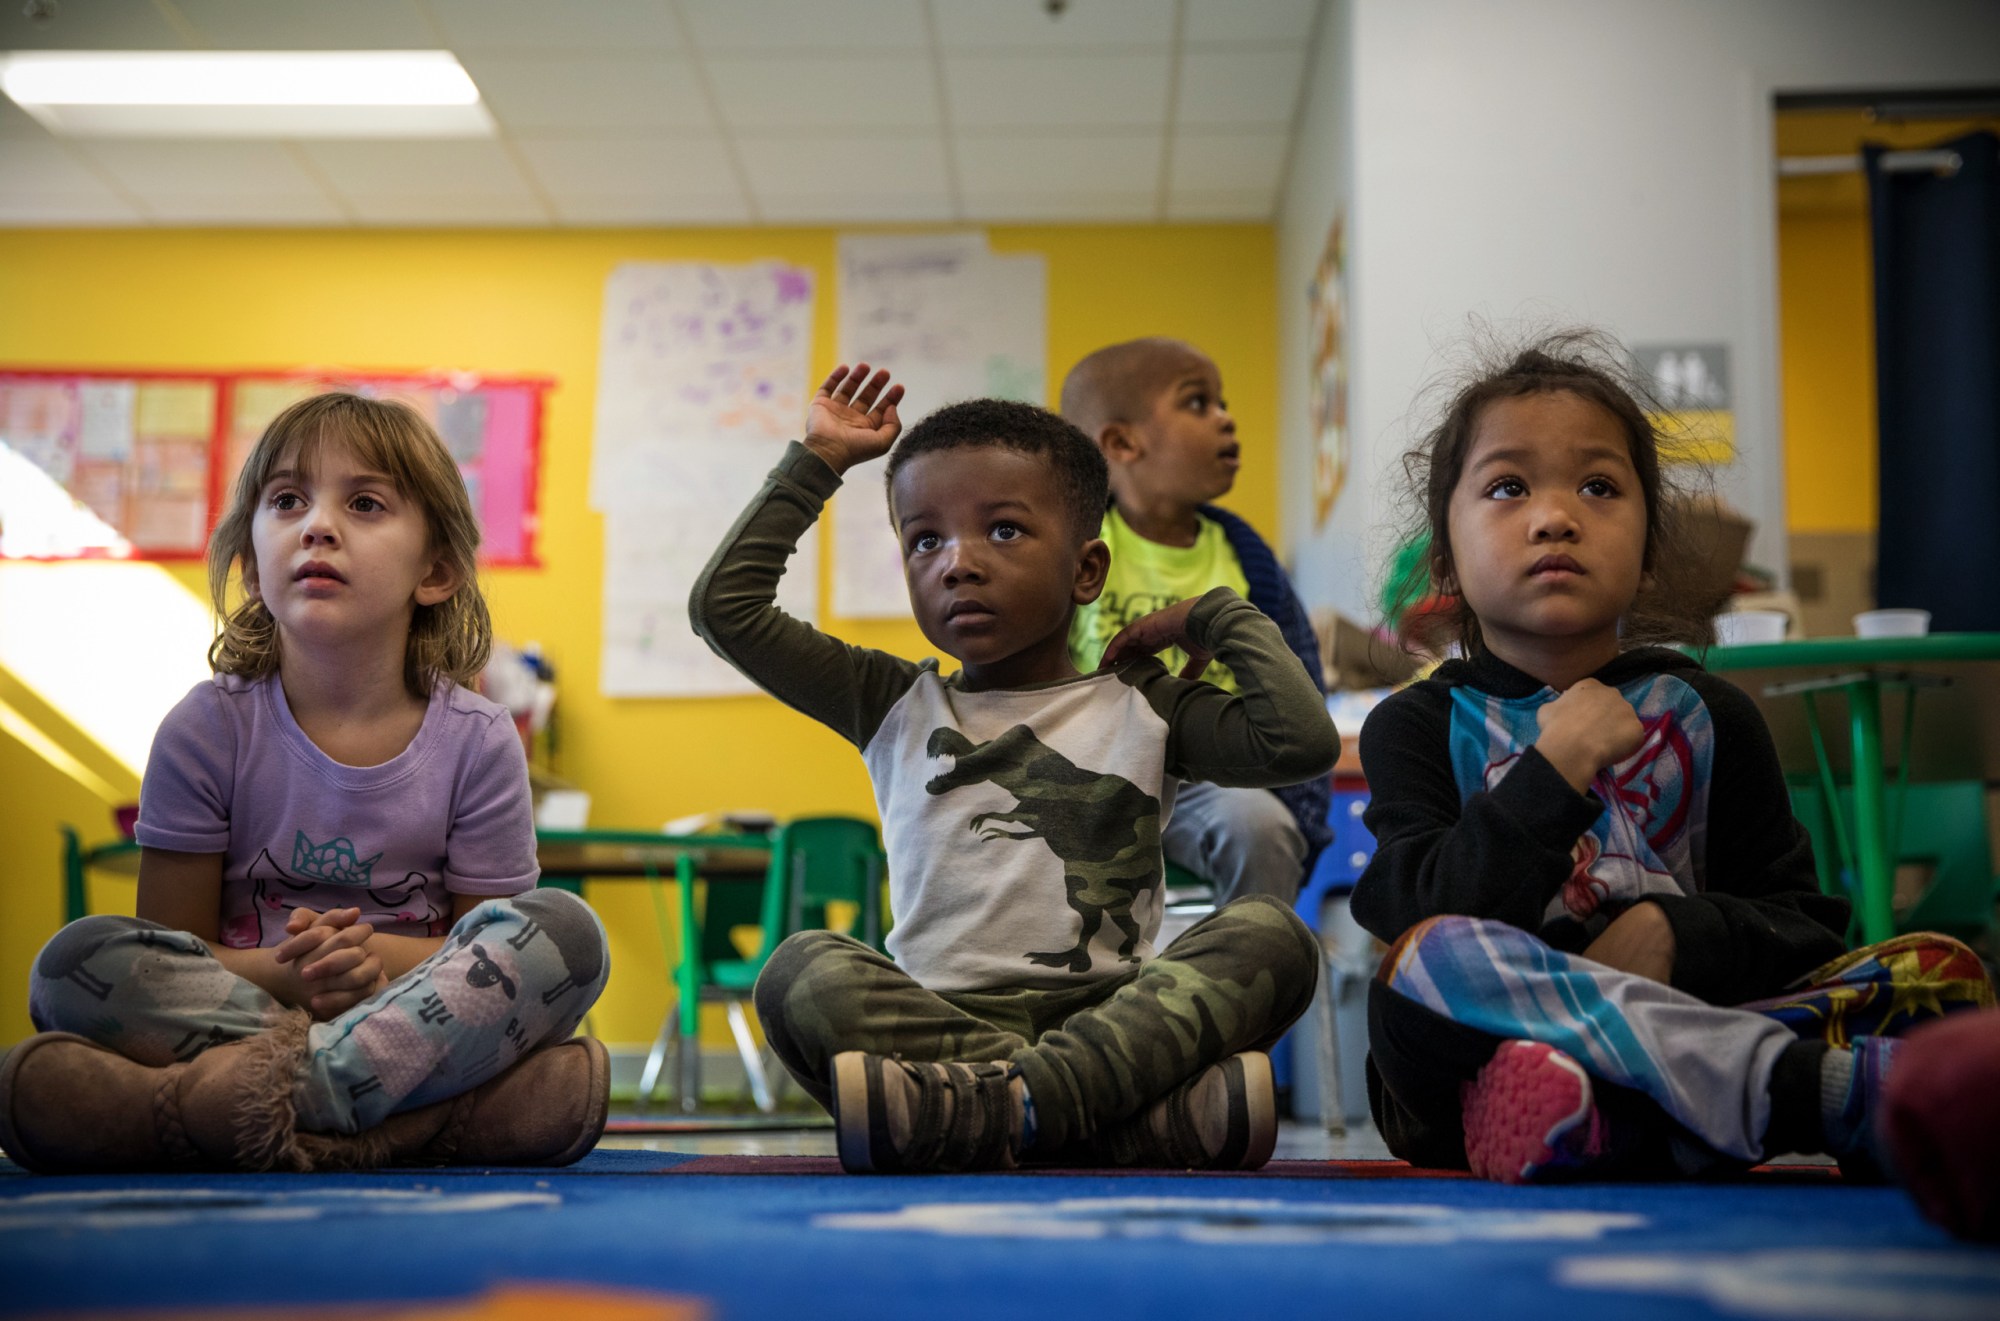 Preschool students attend a class at a charter school in Washington, D.C., February 2019. (Getty/The Washington Post/Evelyn Hockstein)